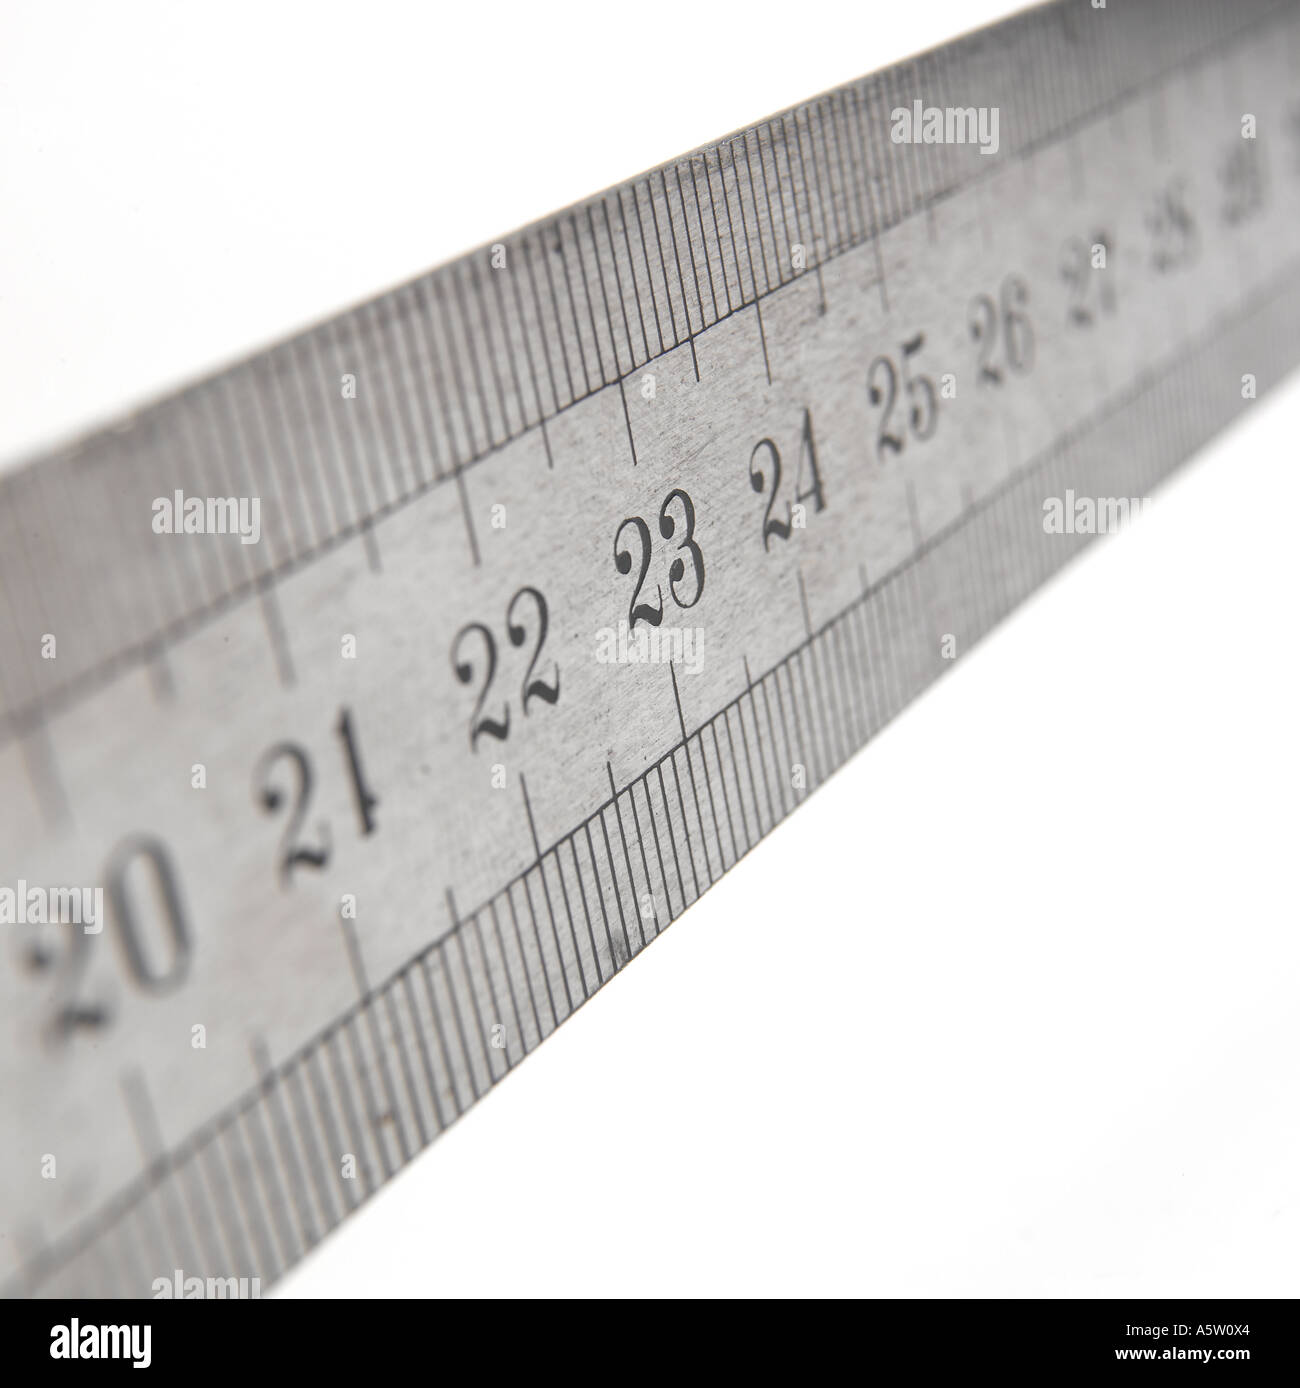 Isolated Shot Of 60 Cm Metal Ruler On White Background Stock Photo -  Download Image Now - iStock